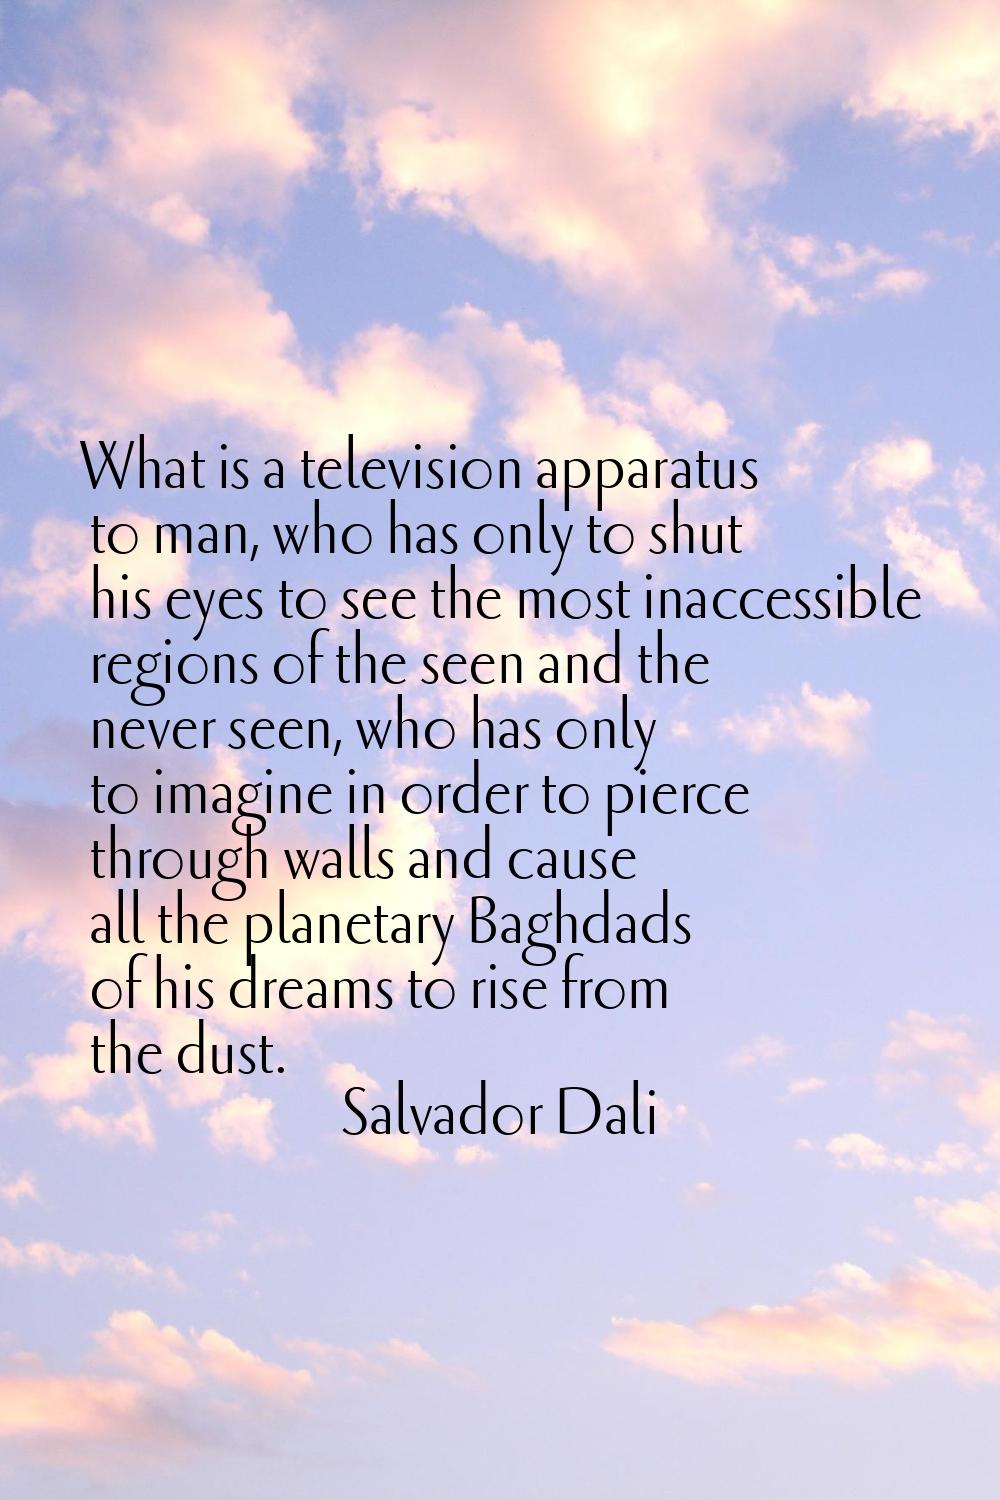 What is a television apparatus to man, who has only to shut his eyes to see the most inaccessible r